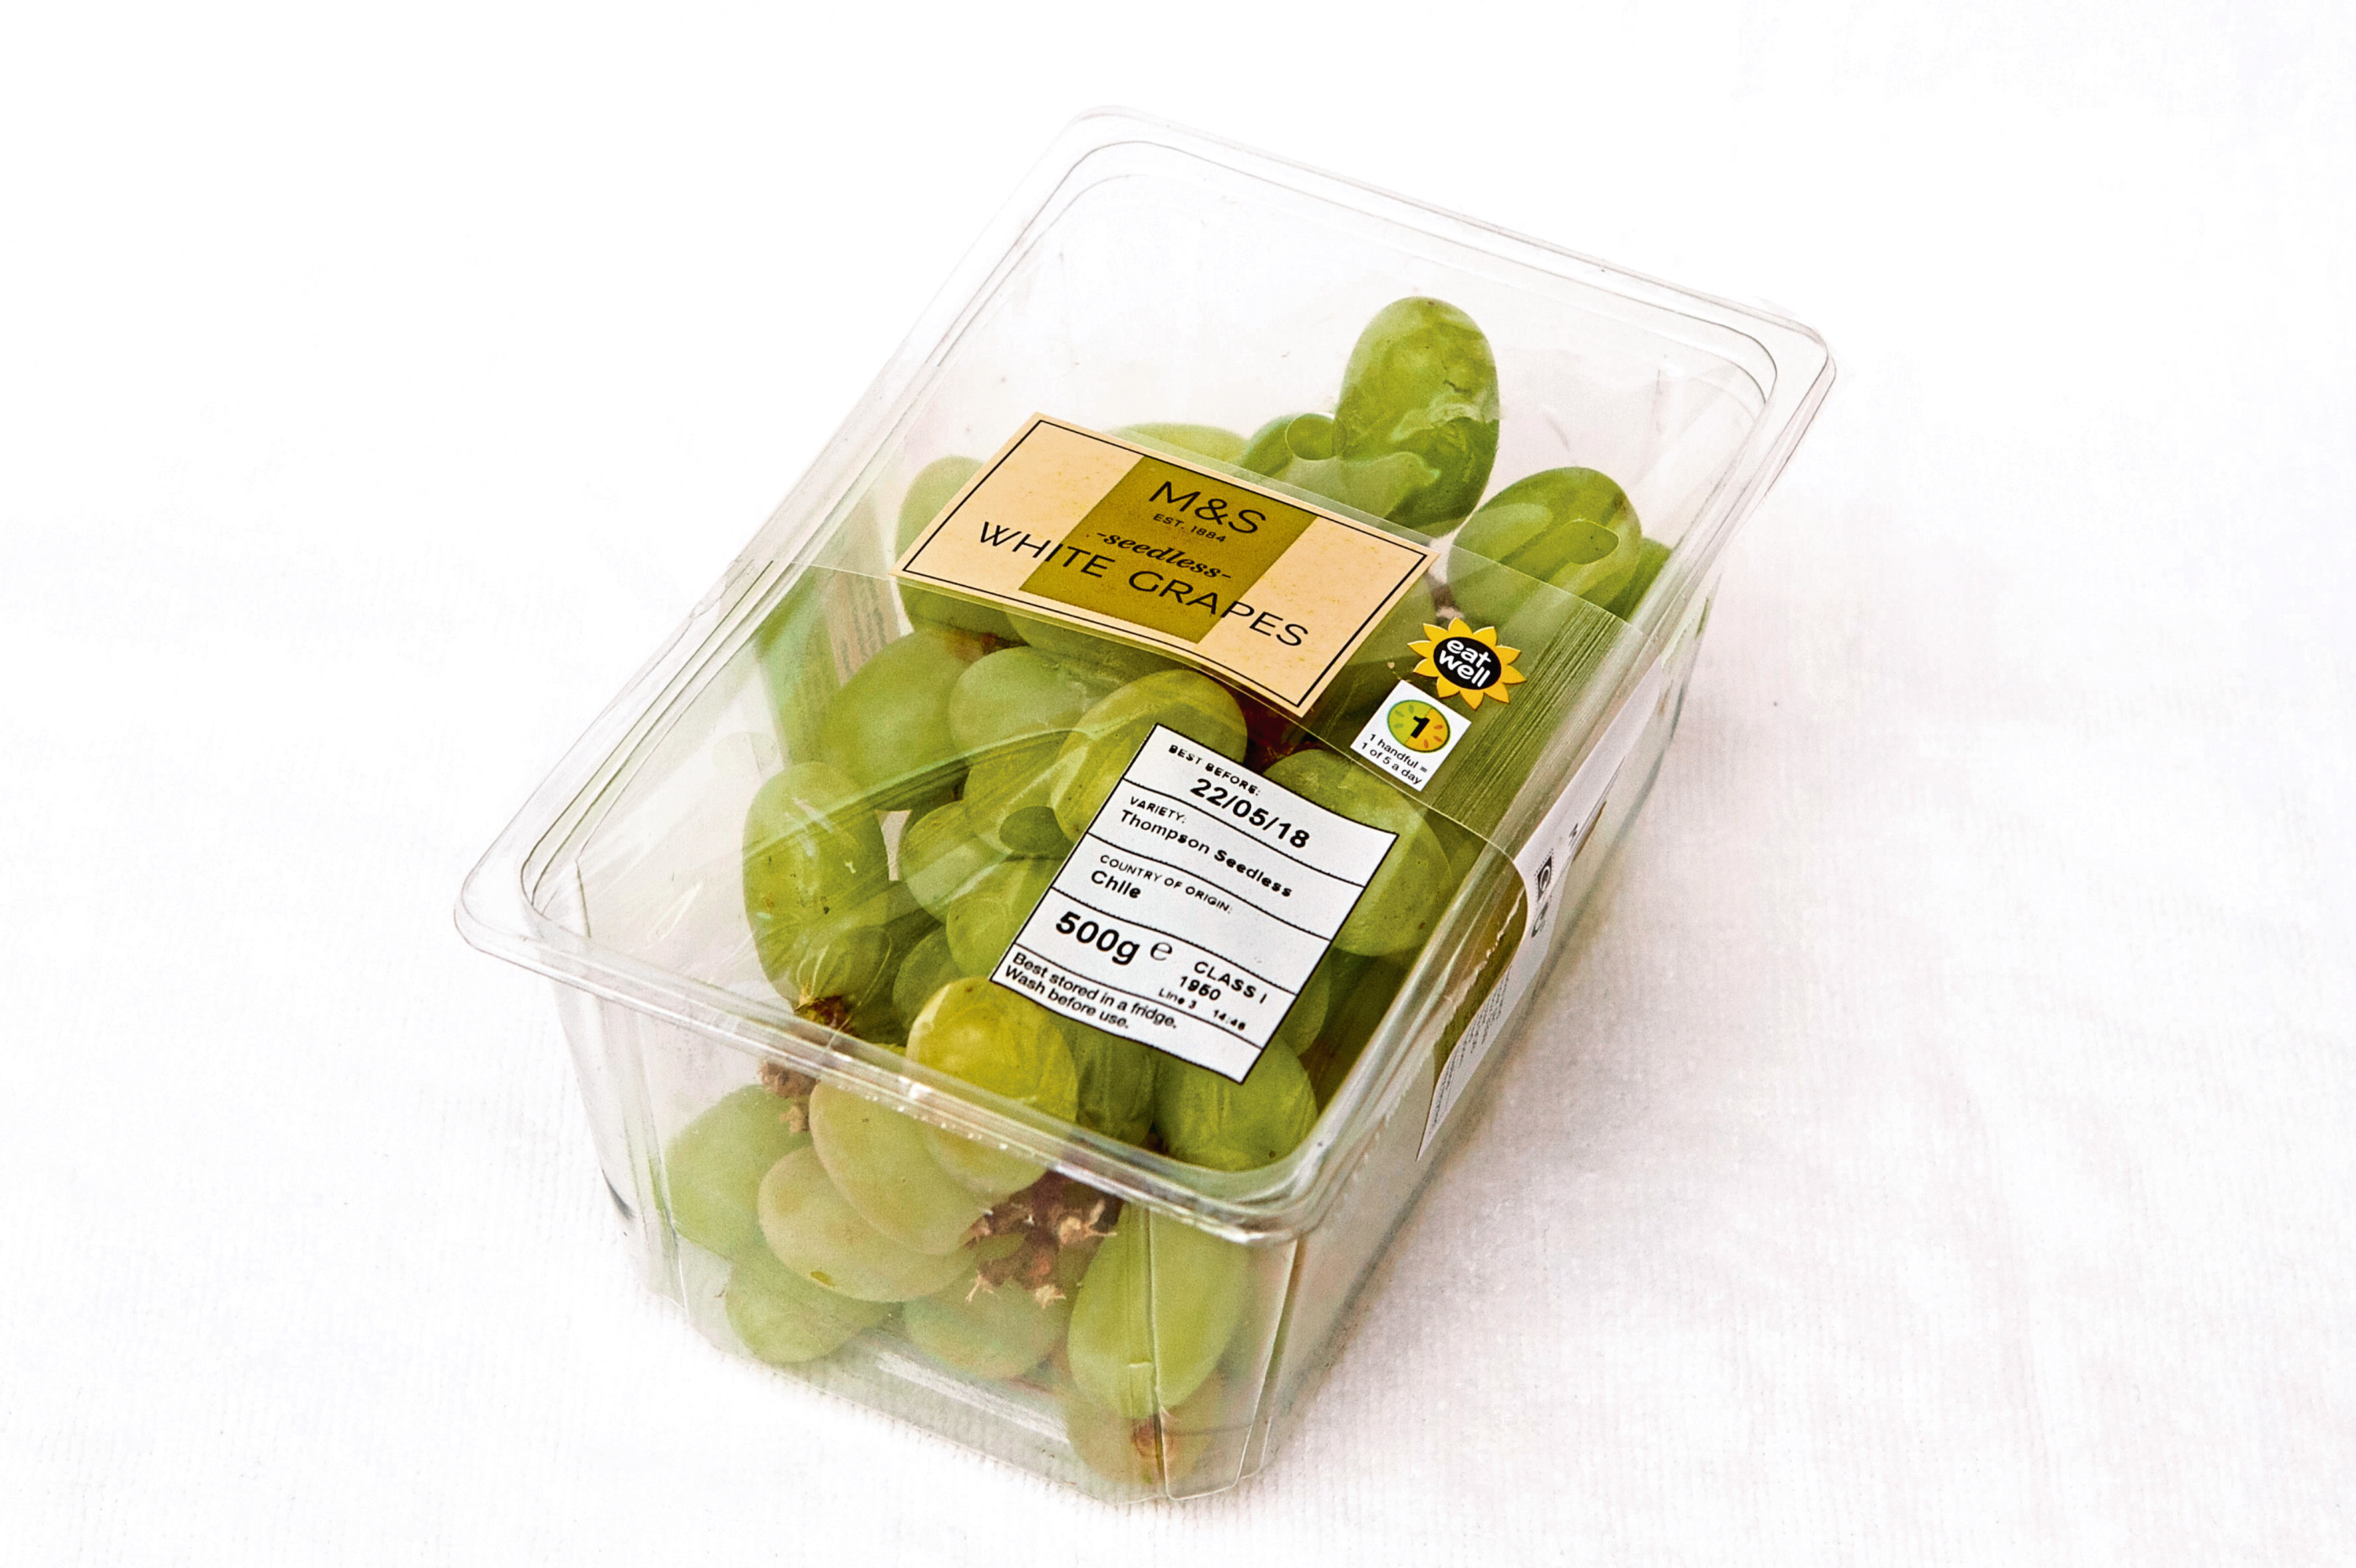 These grapes cost £2.80 in a hospital shop compared to £2.75 on the high street